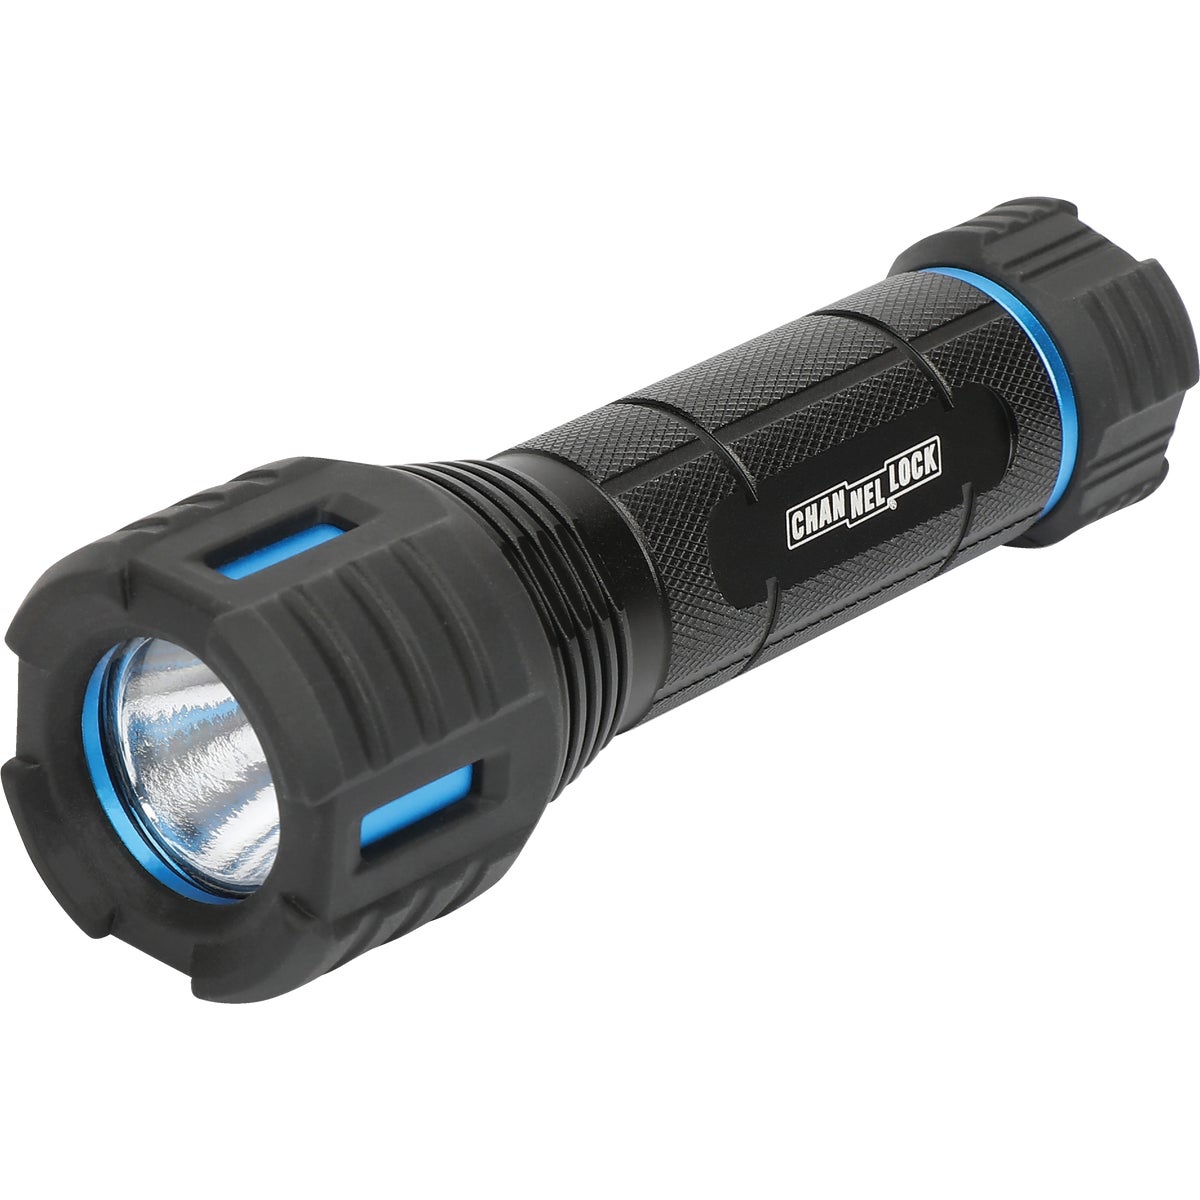 Channellock 165 Lm. LED 3AAA (Included) Flashlight